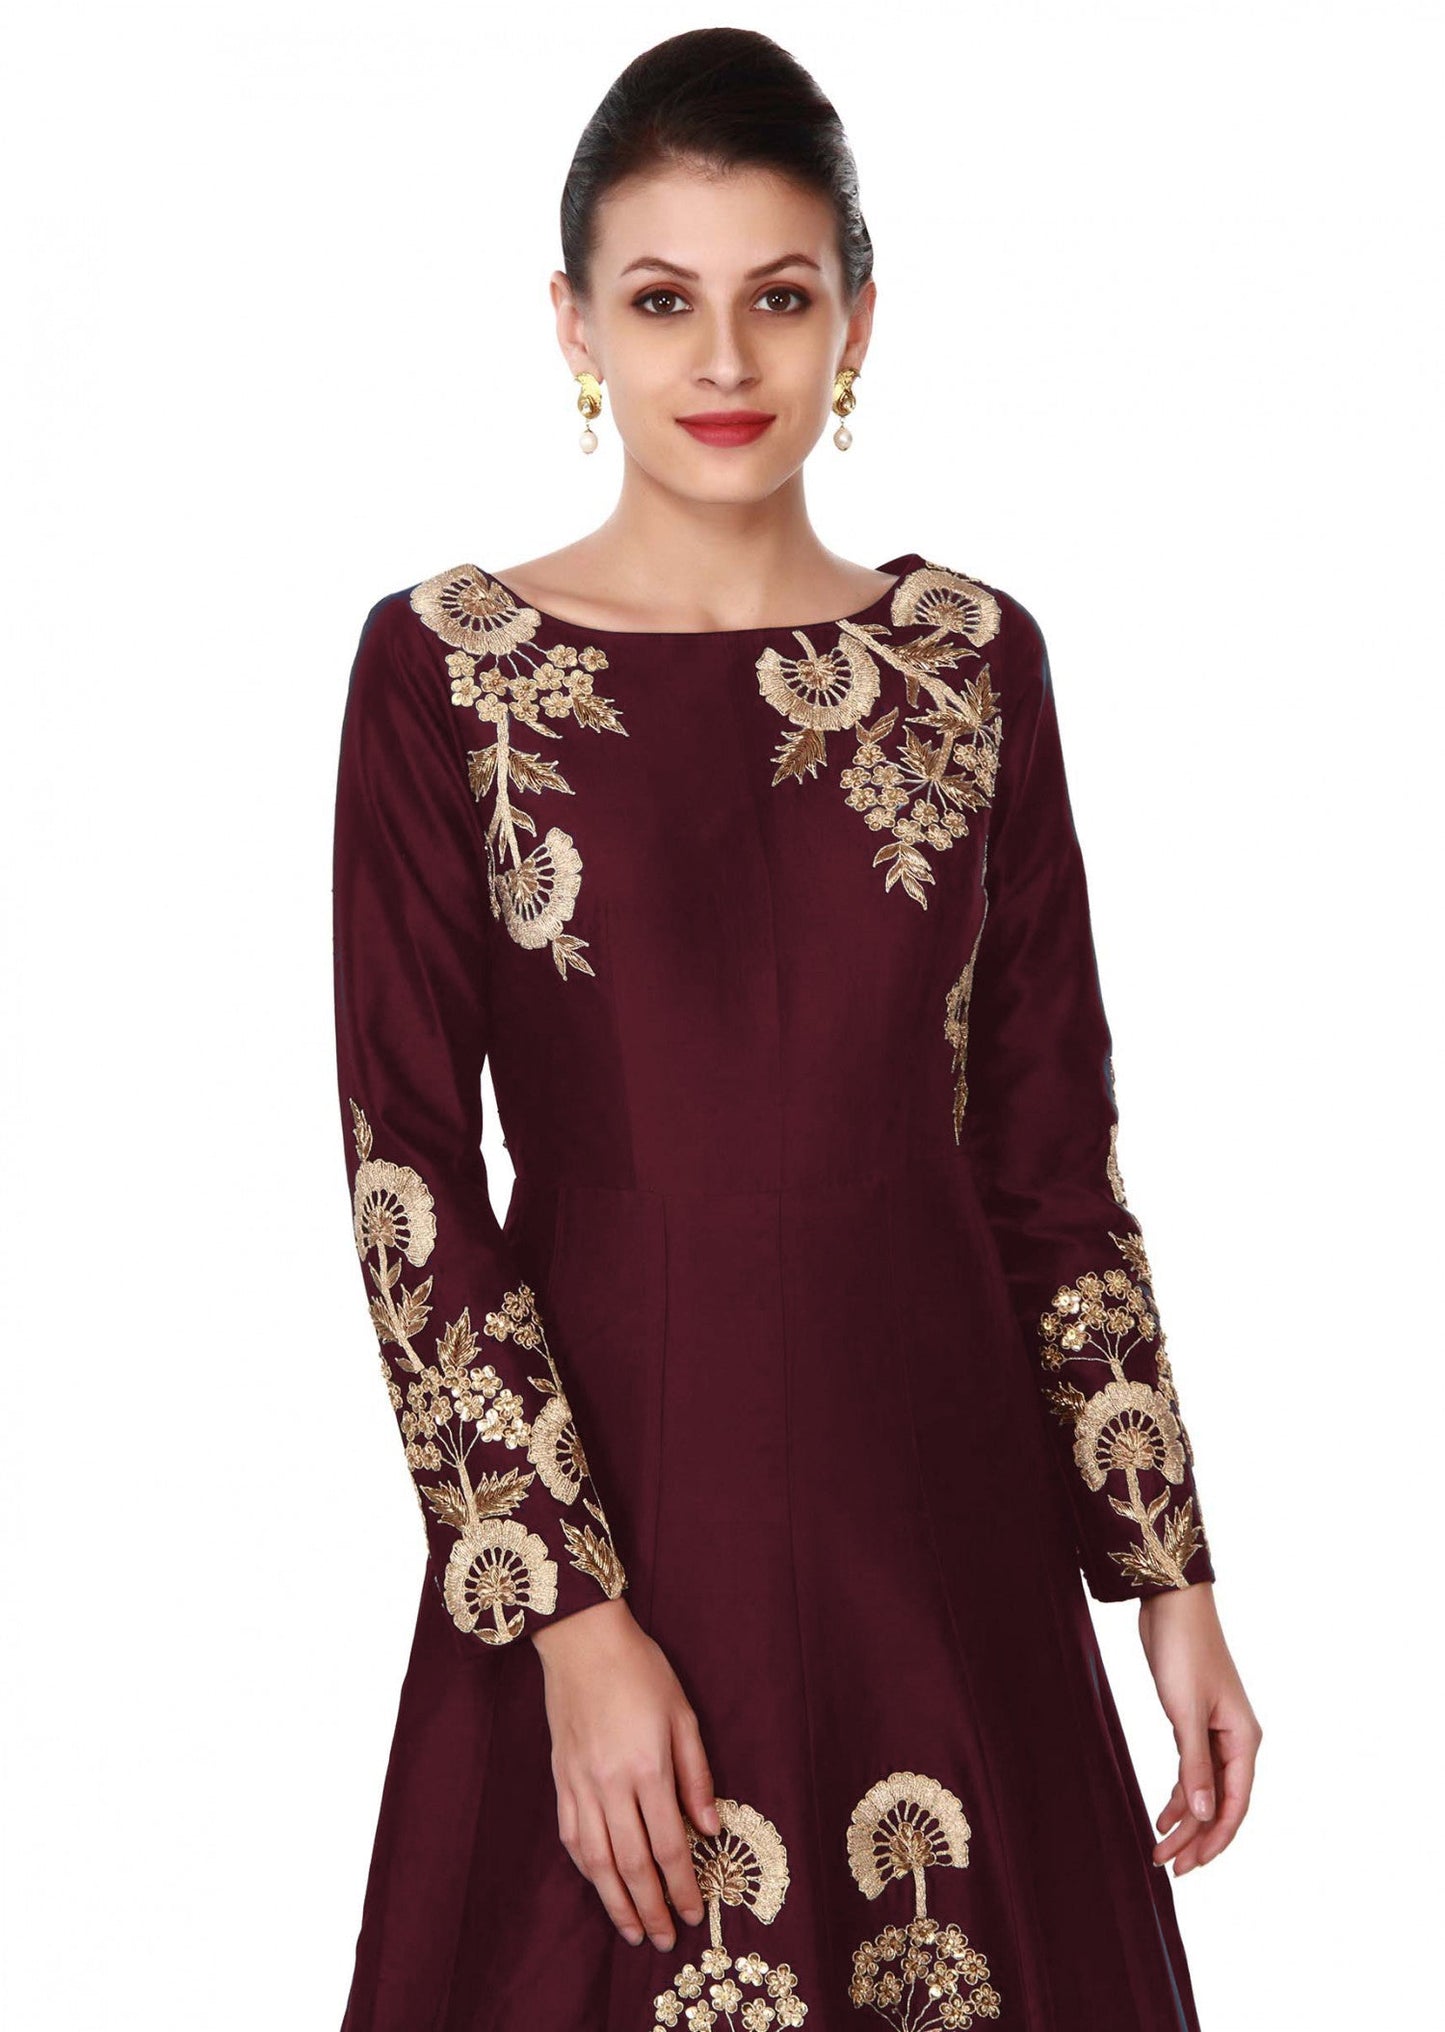 Maroon Indian Tafetta Gown For Indian Festival & Weddings - Sequence Embroidery Work, Zari Work, Dori Work